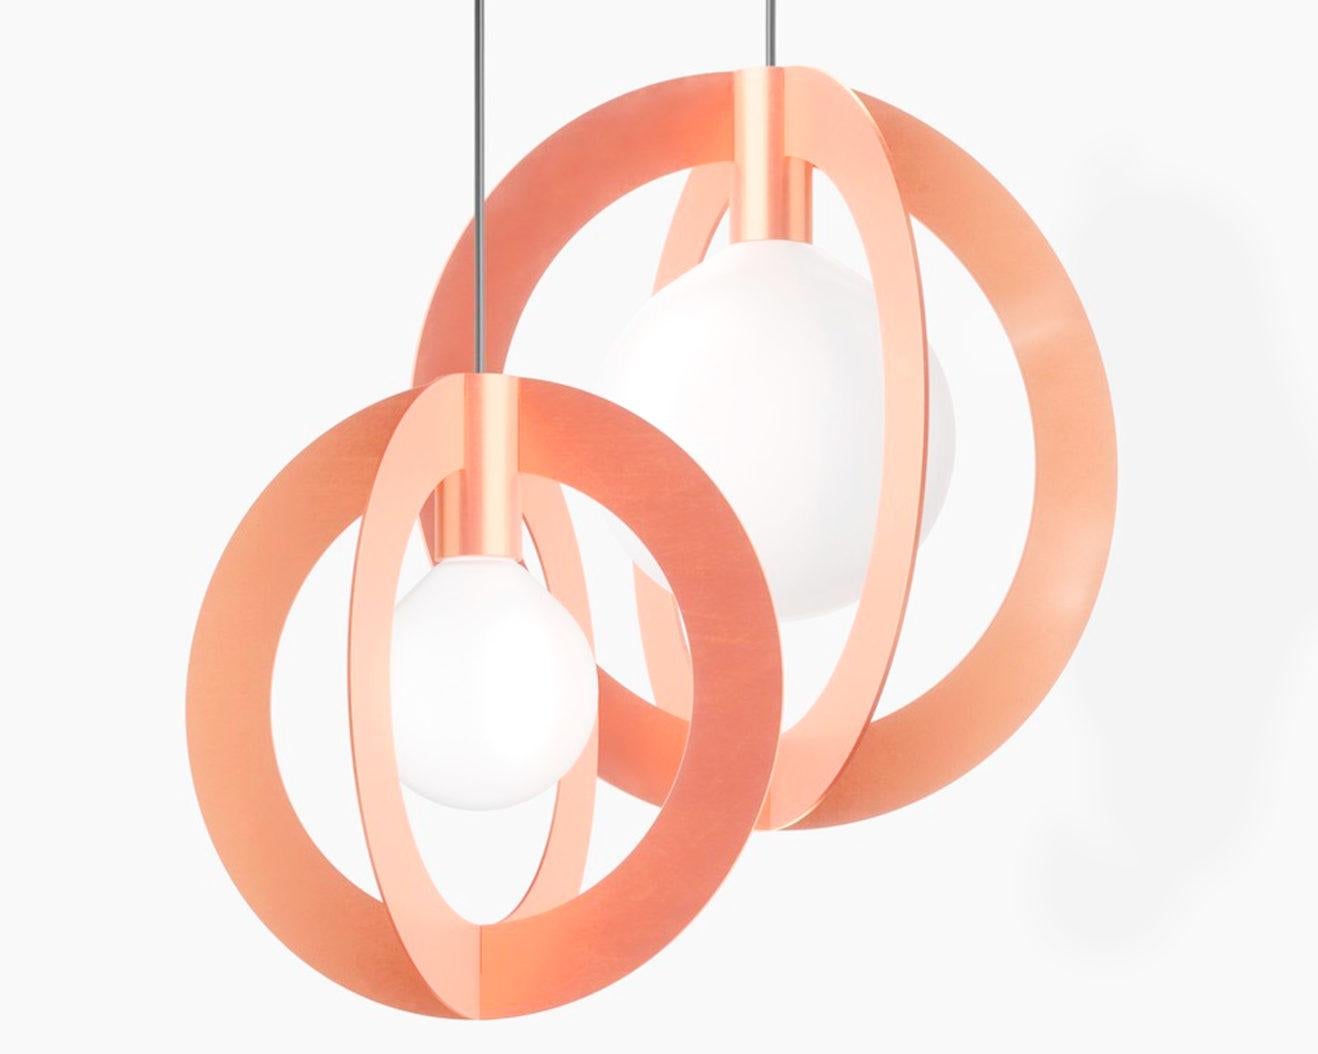 Diaradius 34 is a Minimalist pendant lamp design by Wishnya Design Studio.
Copper finish. 

Measures: D 34cm
LED G9 60W 220V - US compatible
Dimmable
Adjustable wire

Two sizes available 
Two finishes available: copper, brass.